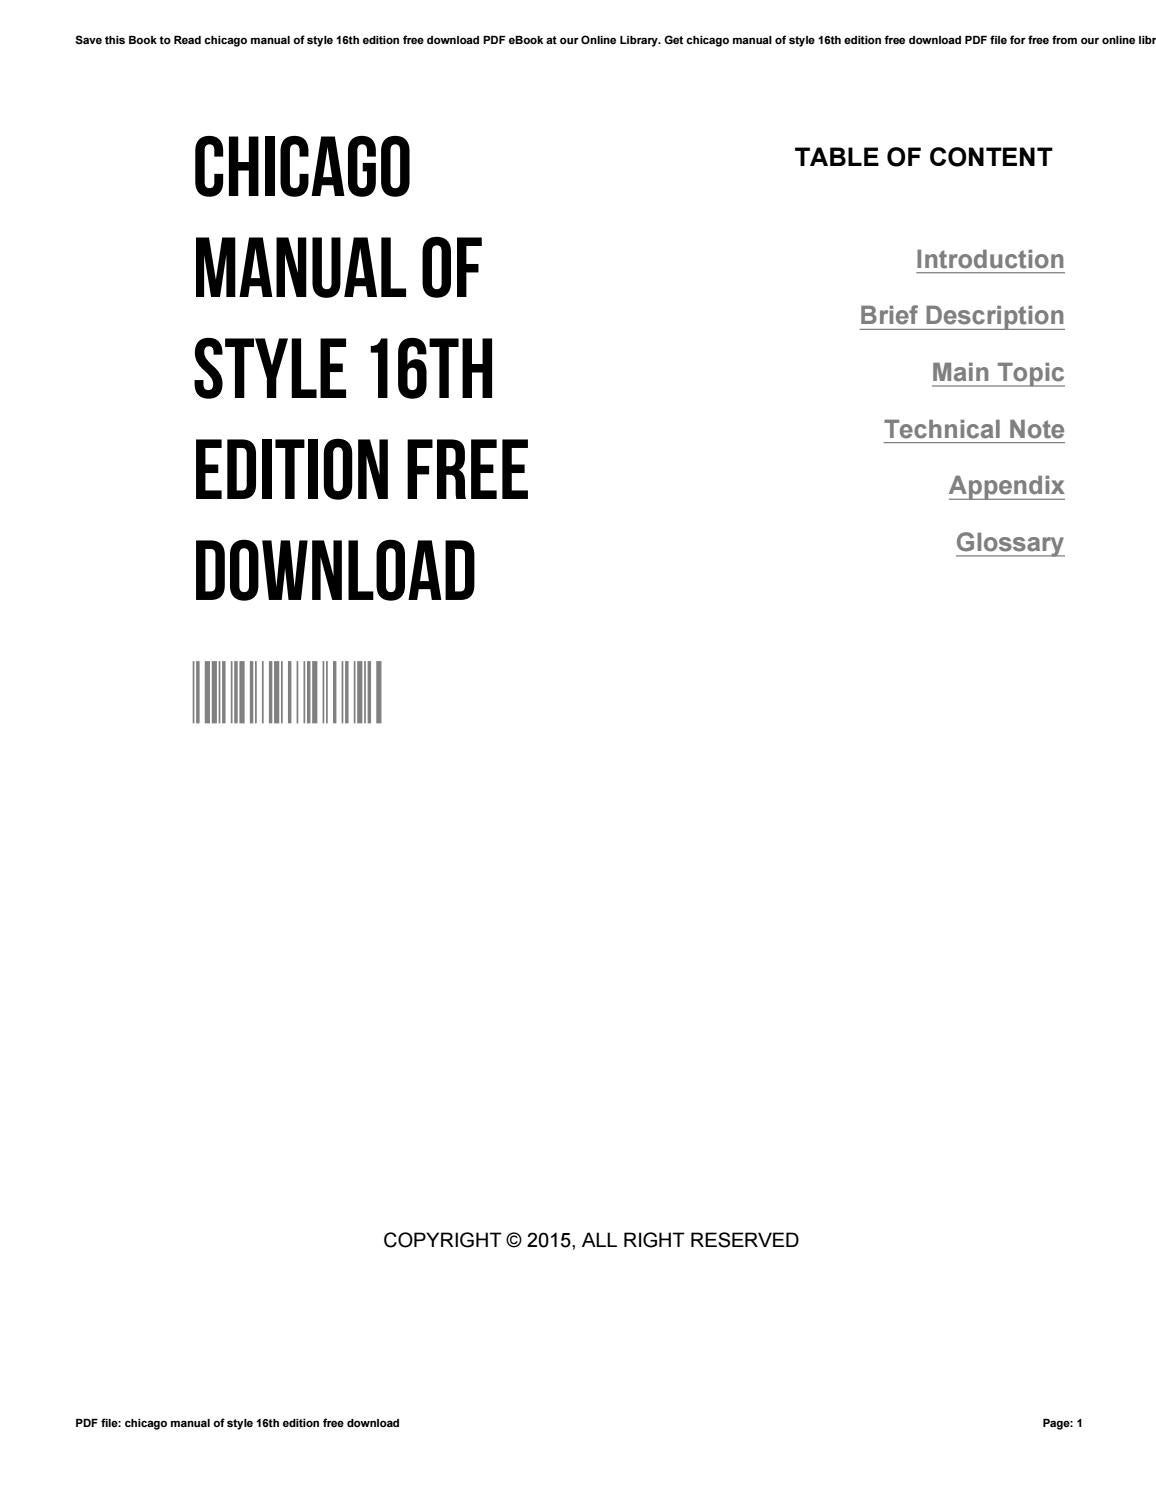 Chicago manual of style online subscription